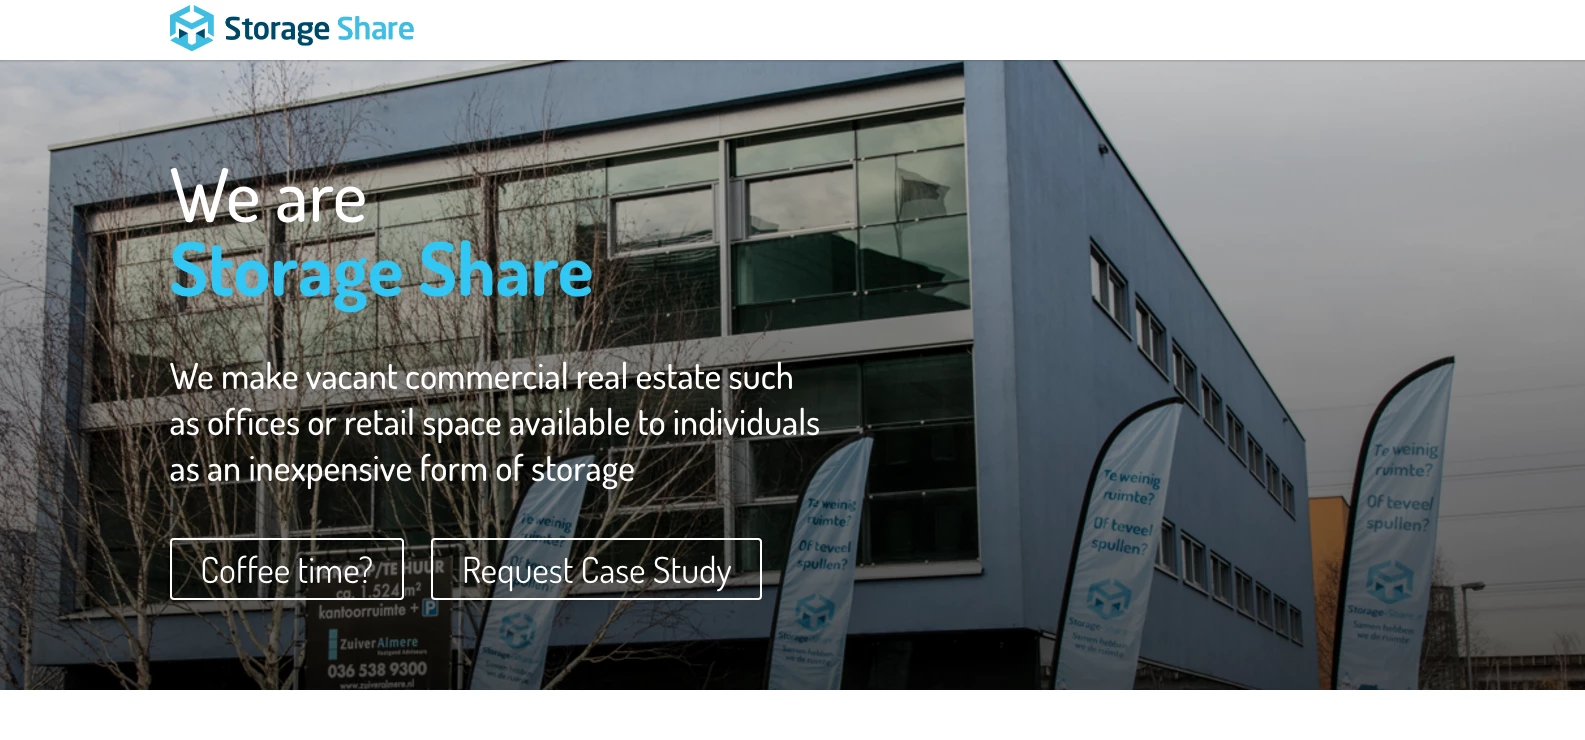 Storage Share is set to launch its sharing economy storage space platform in the UK.